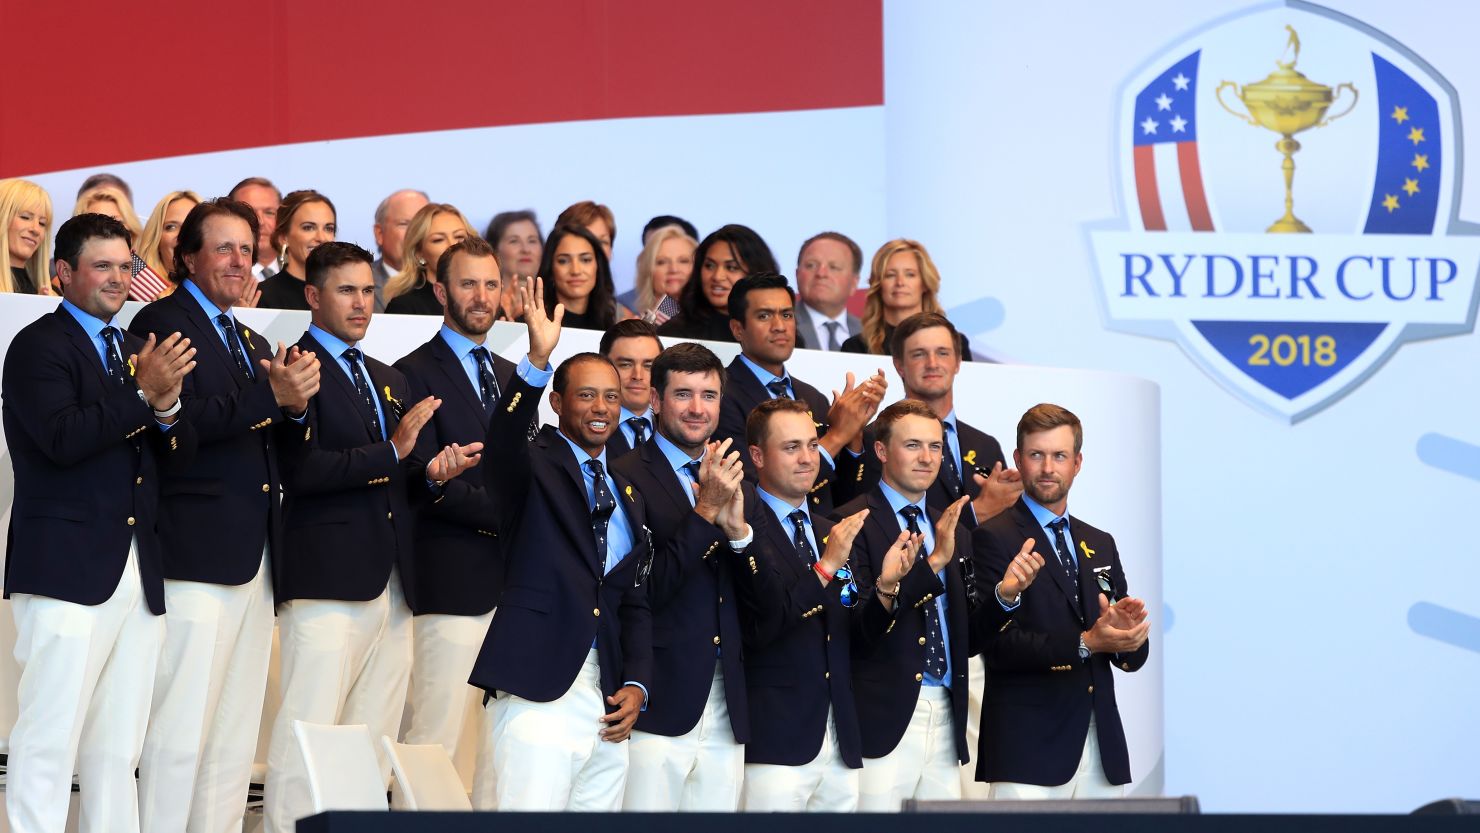 Tiger Woods is introduced alongside the USA Ryder Cup team in Paris.